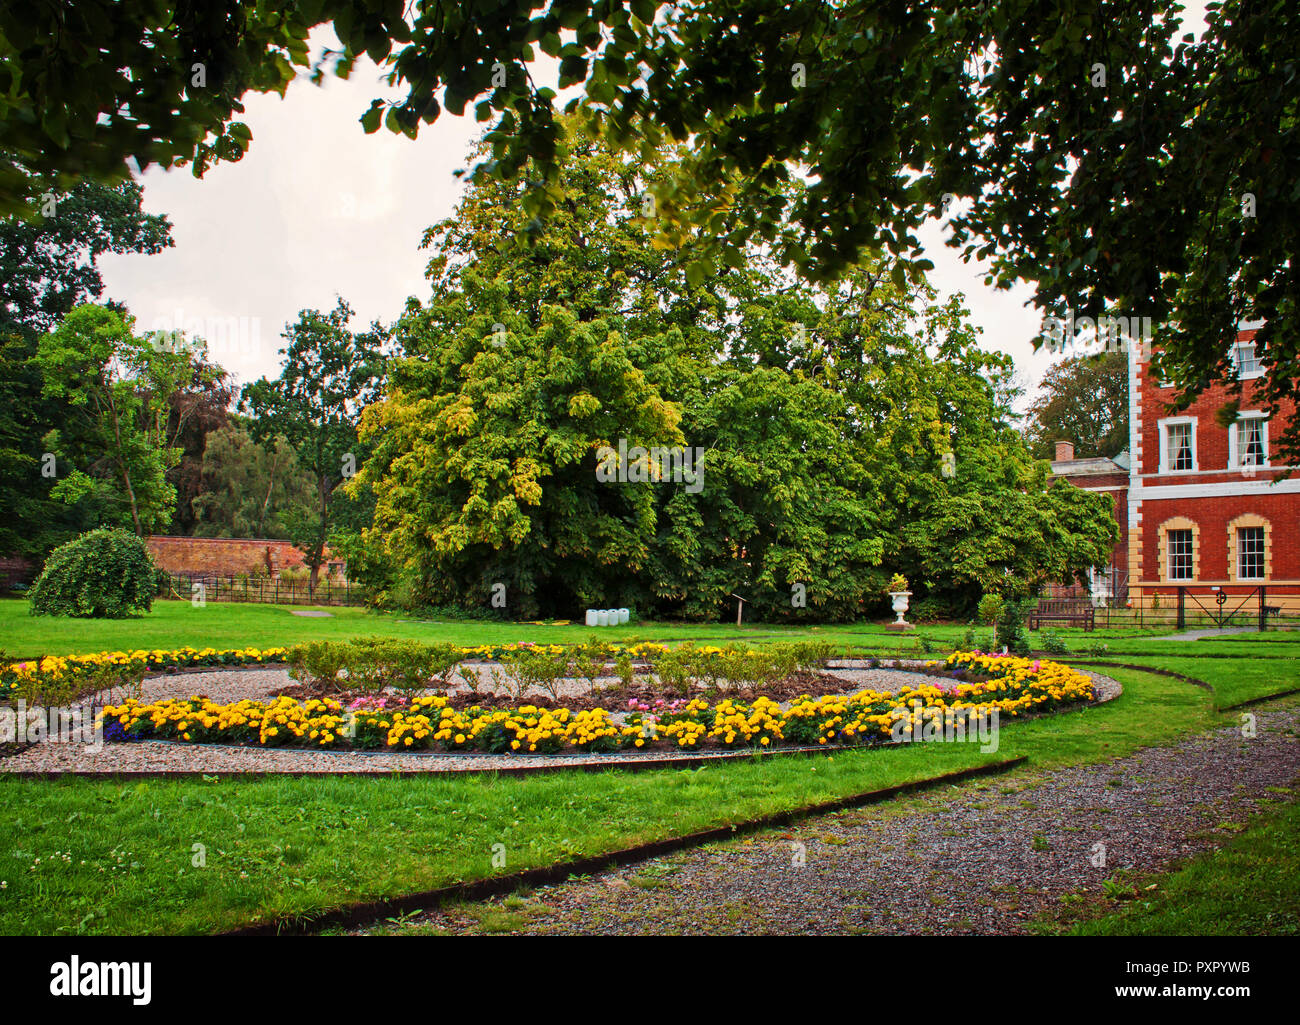 A circular flower bed in the grounds of Lytham Hall, Lancashire Stock Photo